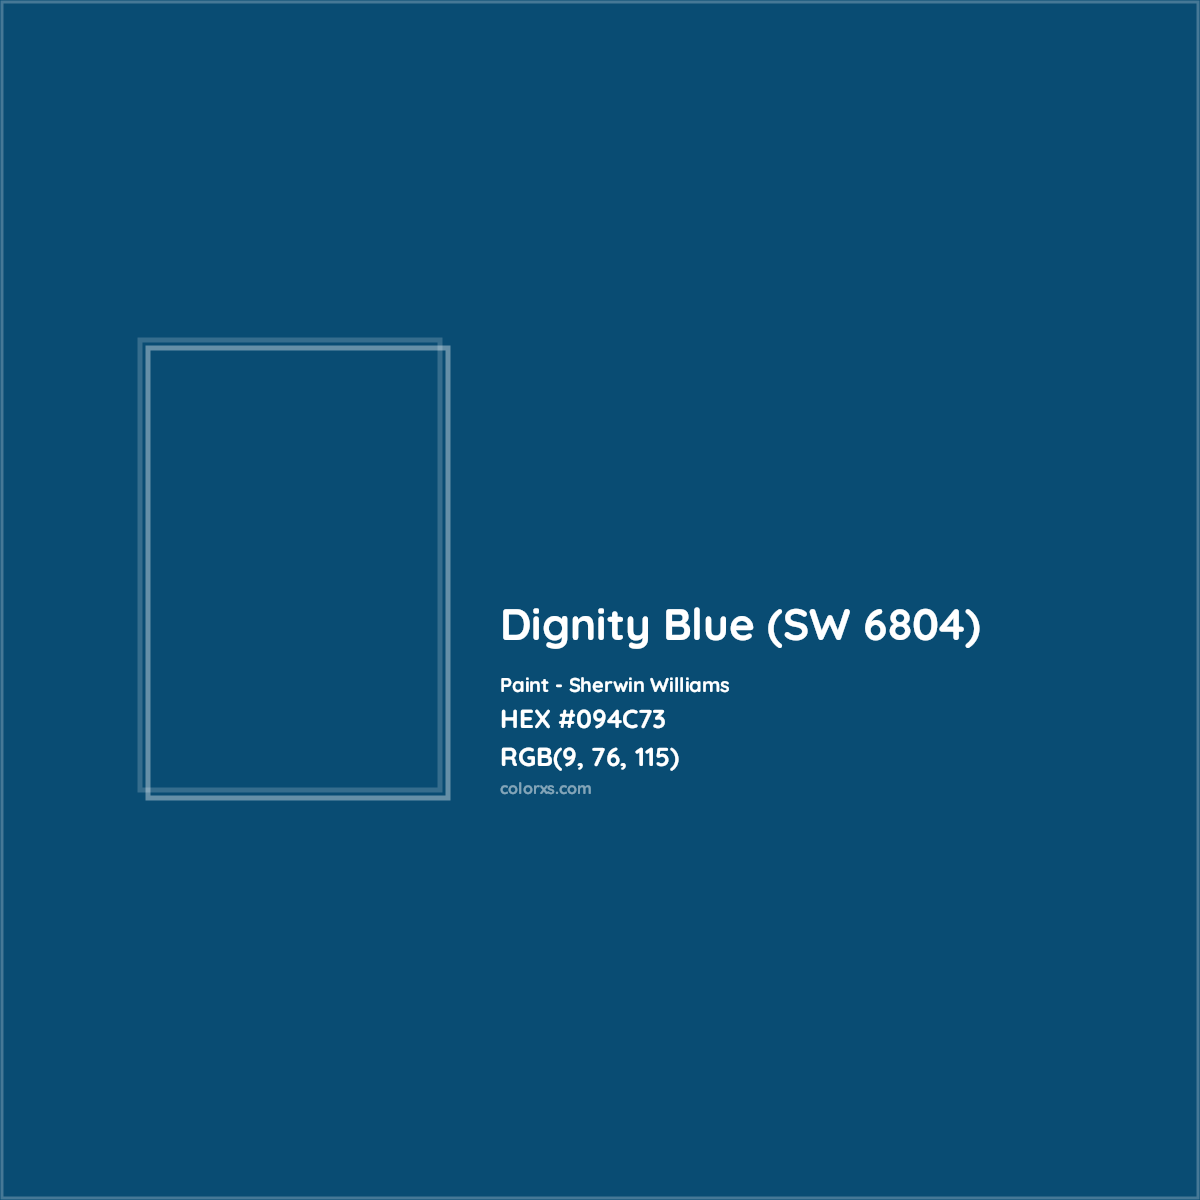 HEX #094C73 Dignity Blue (SW 6804) Paint Sherwin Williams - Color Code